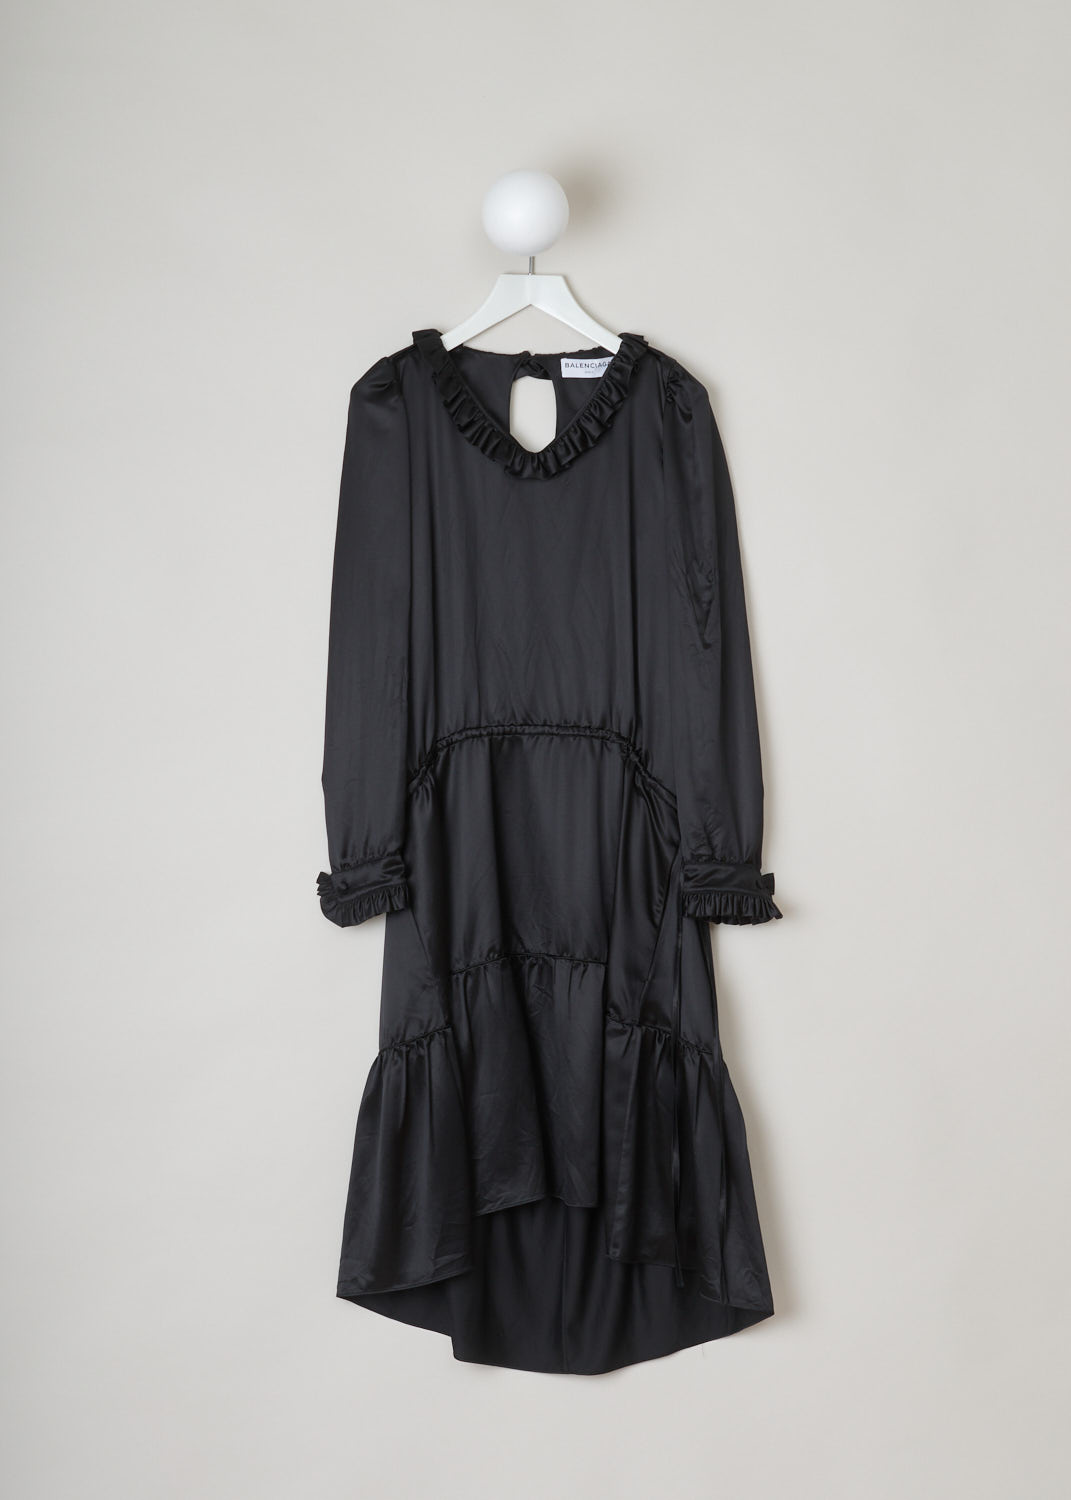 Balenciaga, Black ruffled dress, 494197_TXC02_1000, black, front. This all black dress has a ruffled neckline and cuffs which have a single button. A cord tunnel divides the skirt from the top. The closure option on this piece is the single button on the back.